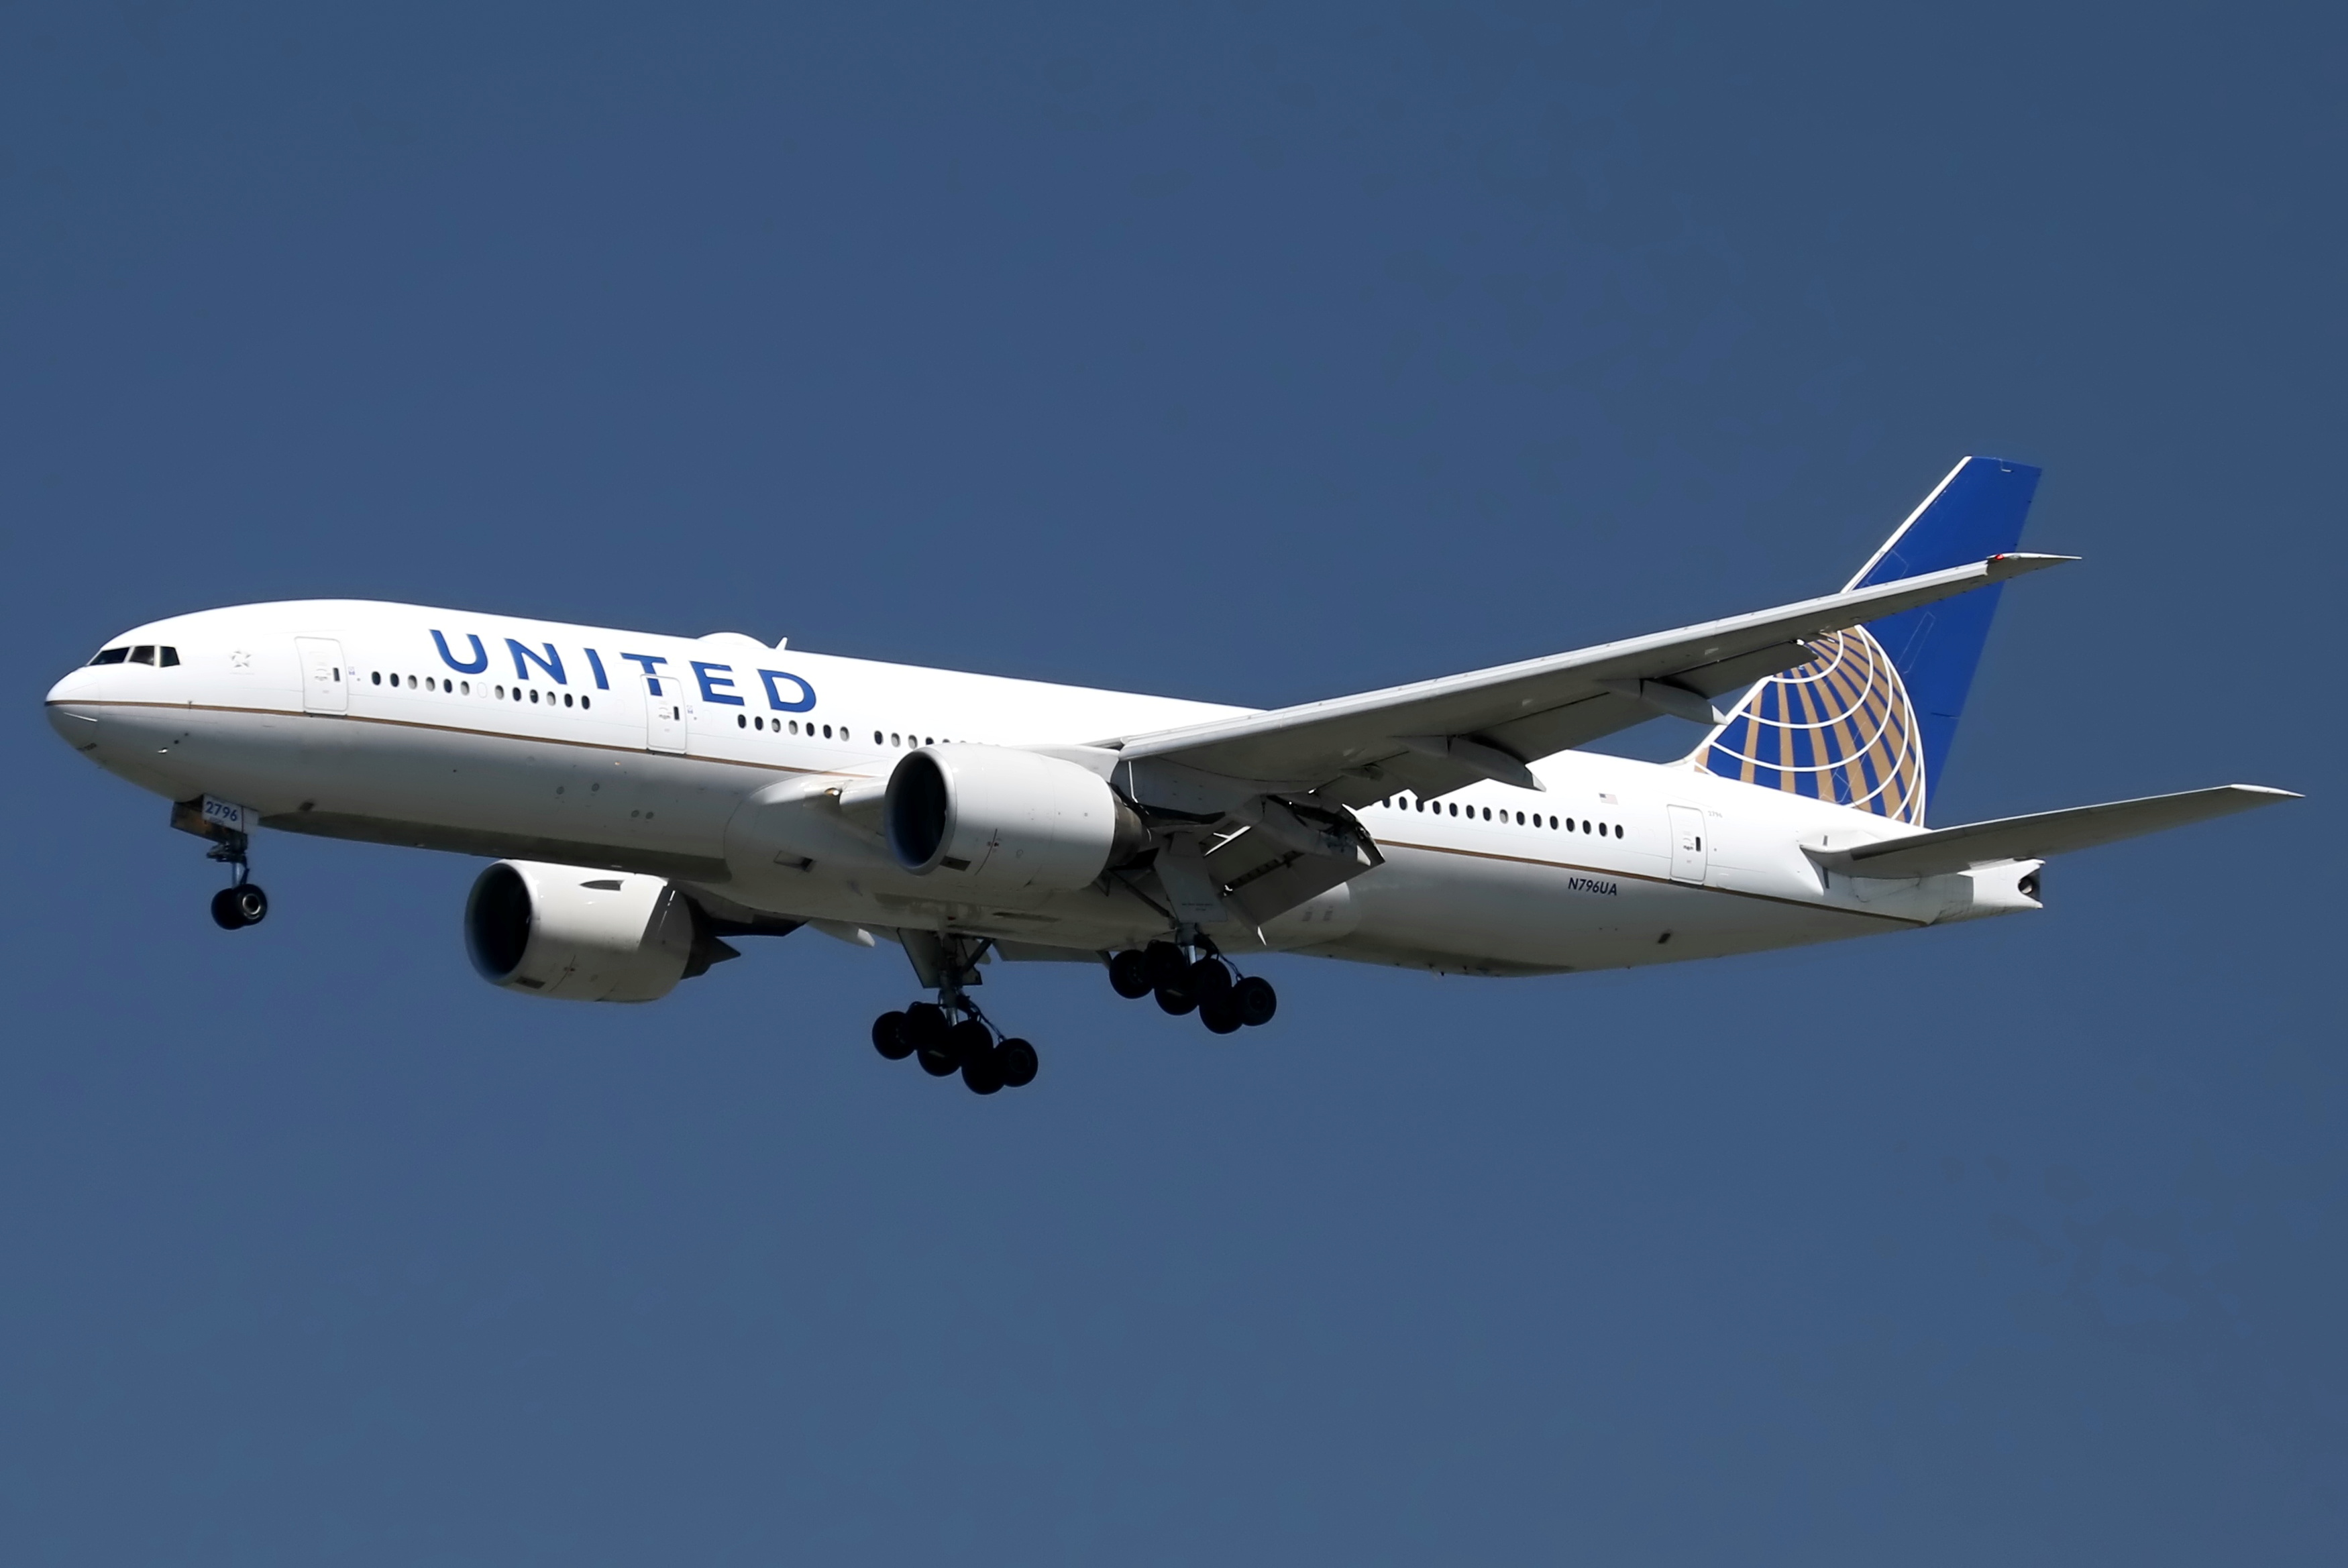 A United Airlines Boeing 777 lands at San Francisco International Airport, San Francisco